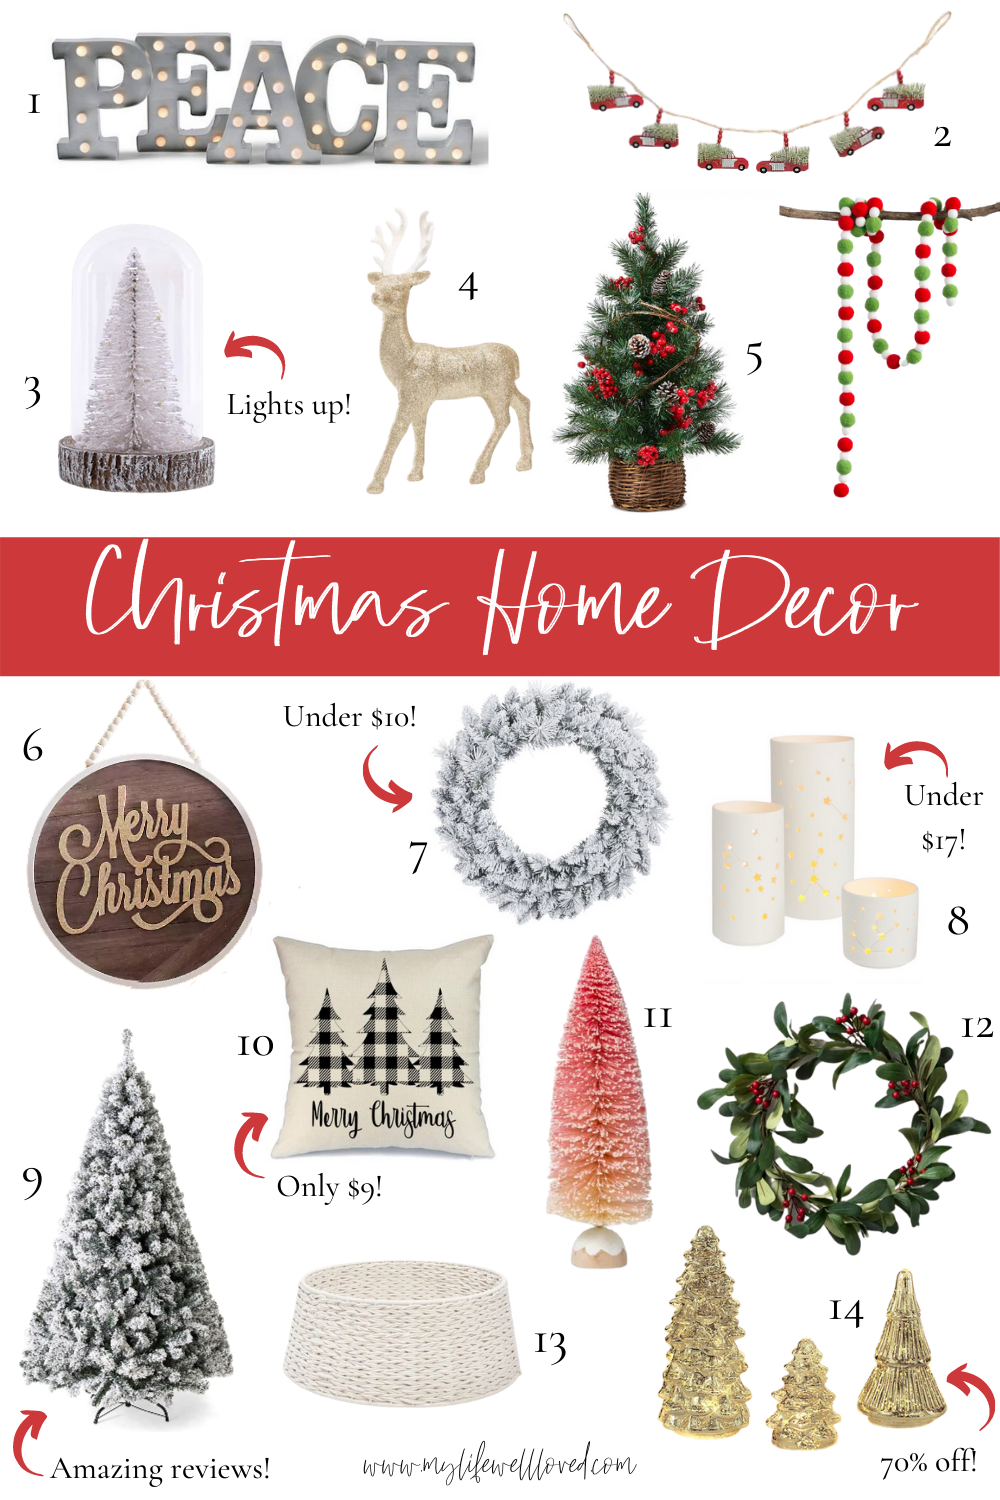 Where to buy Christmas decorations: our top 10 choices for on